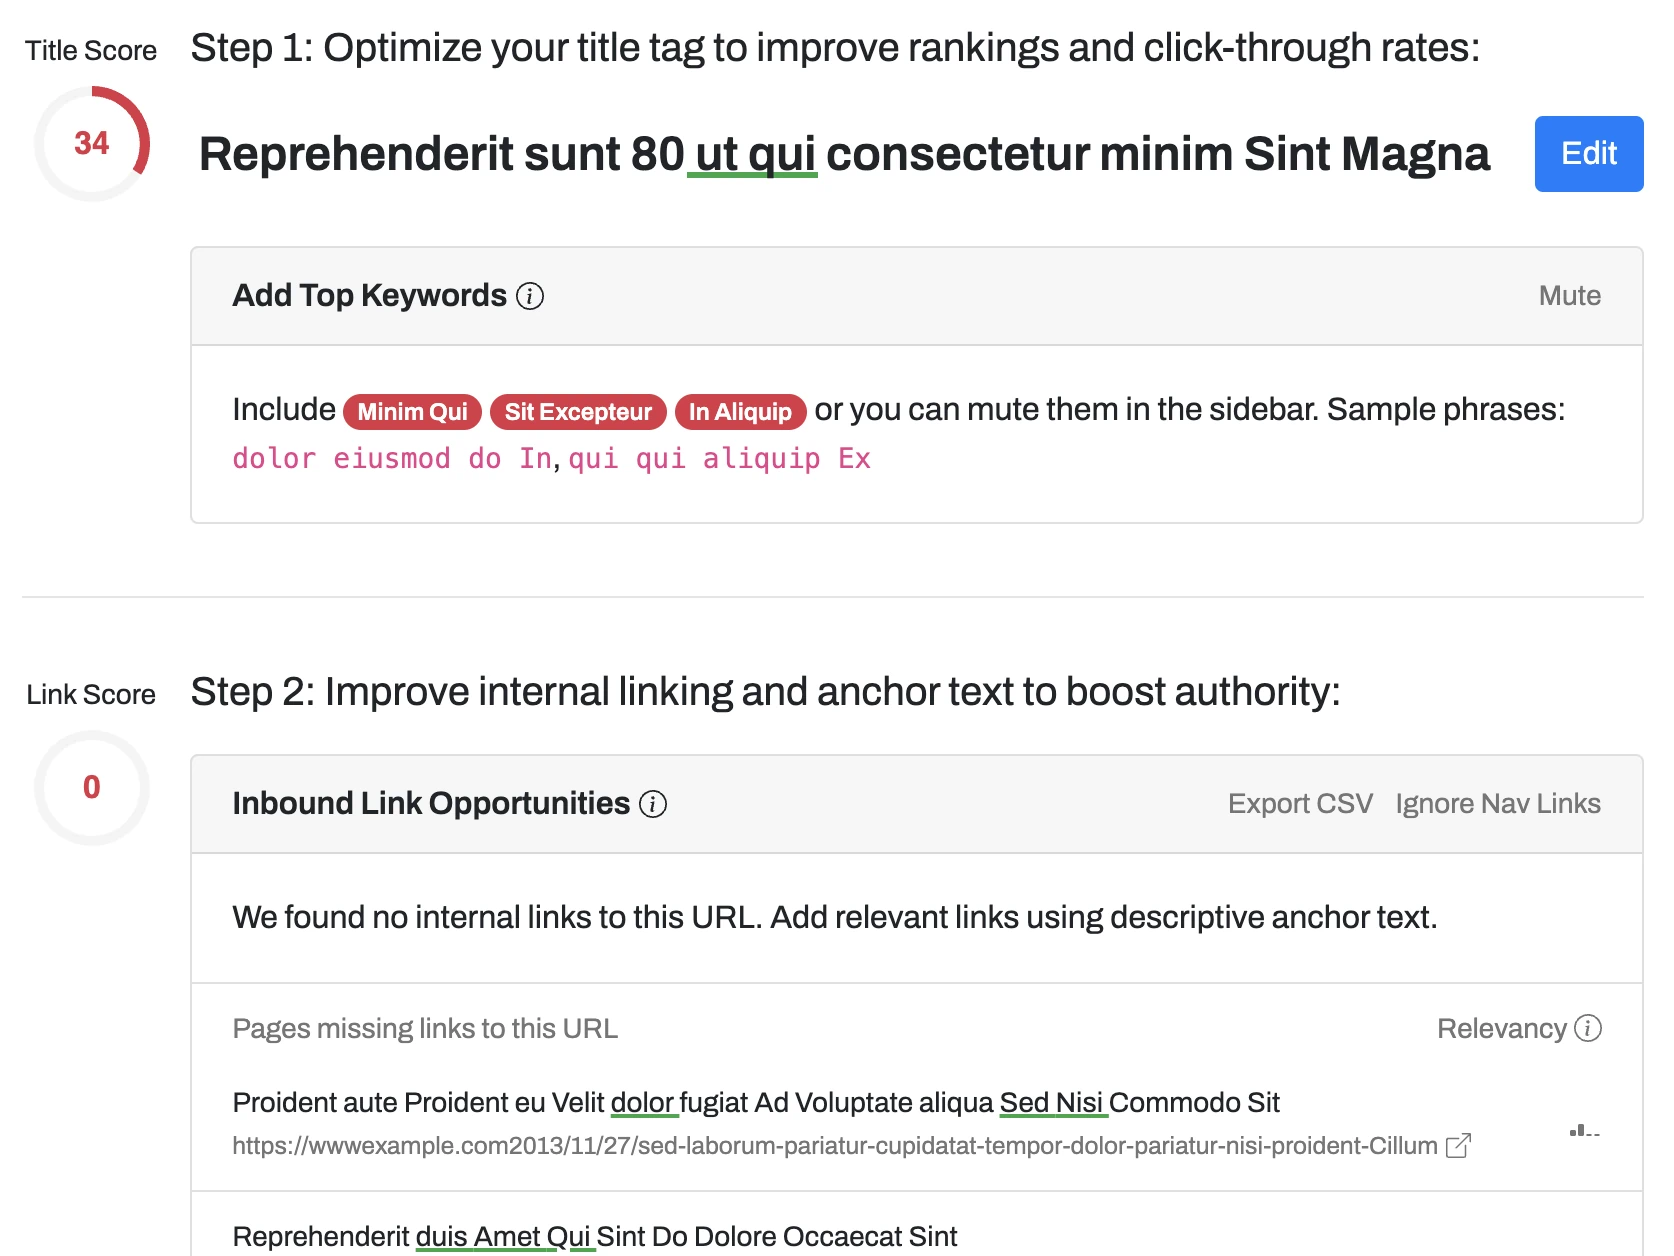 Optimize your title tag to improve rankings and click-through rates